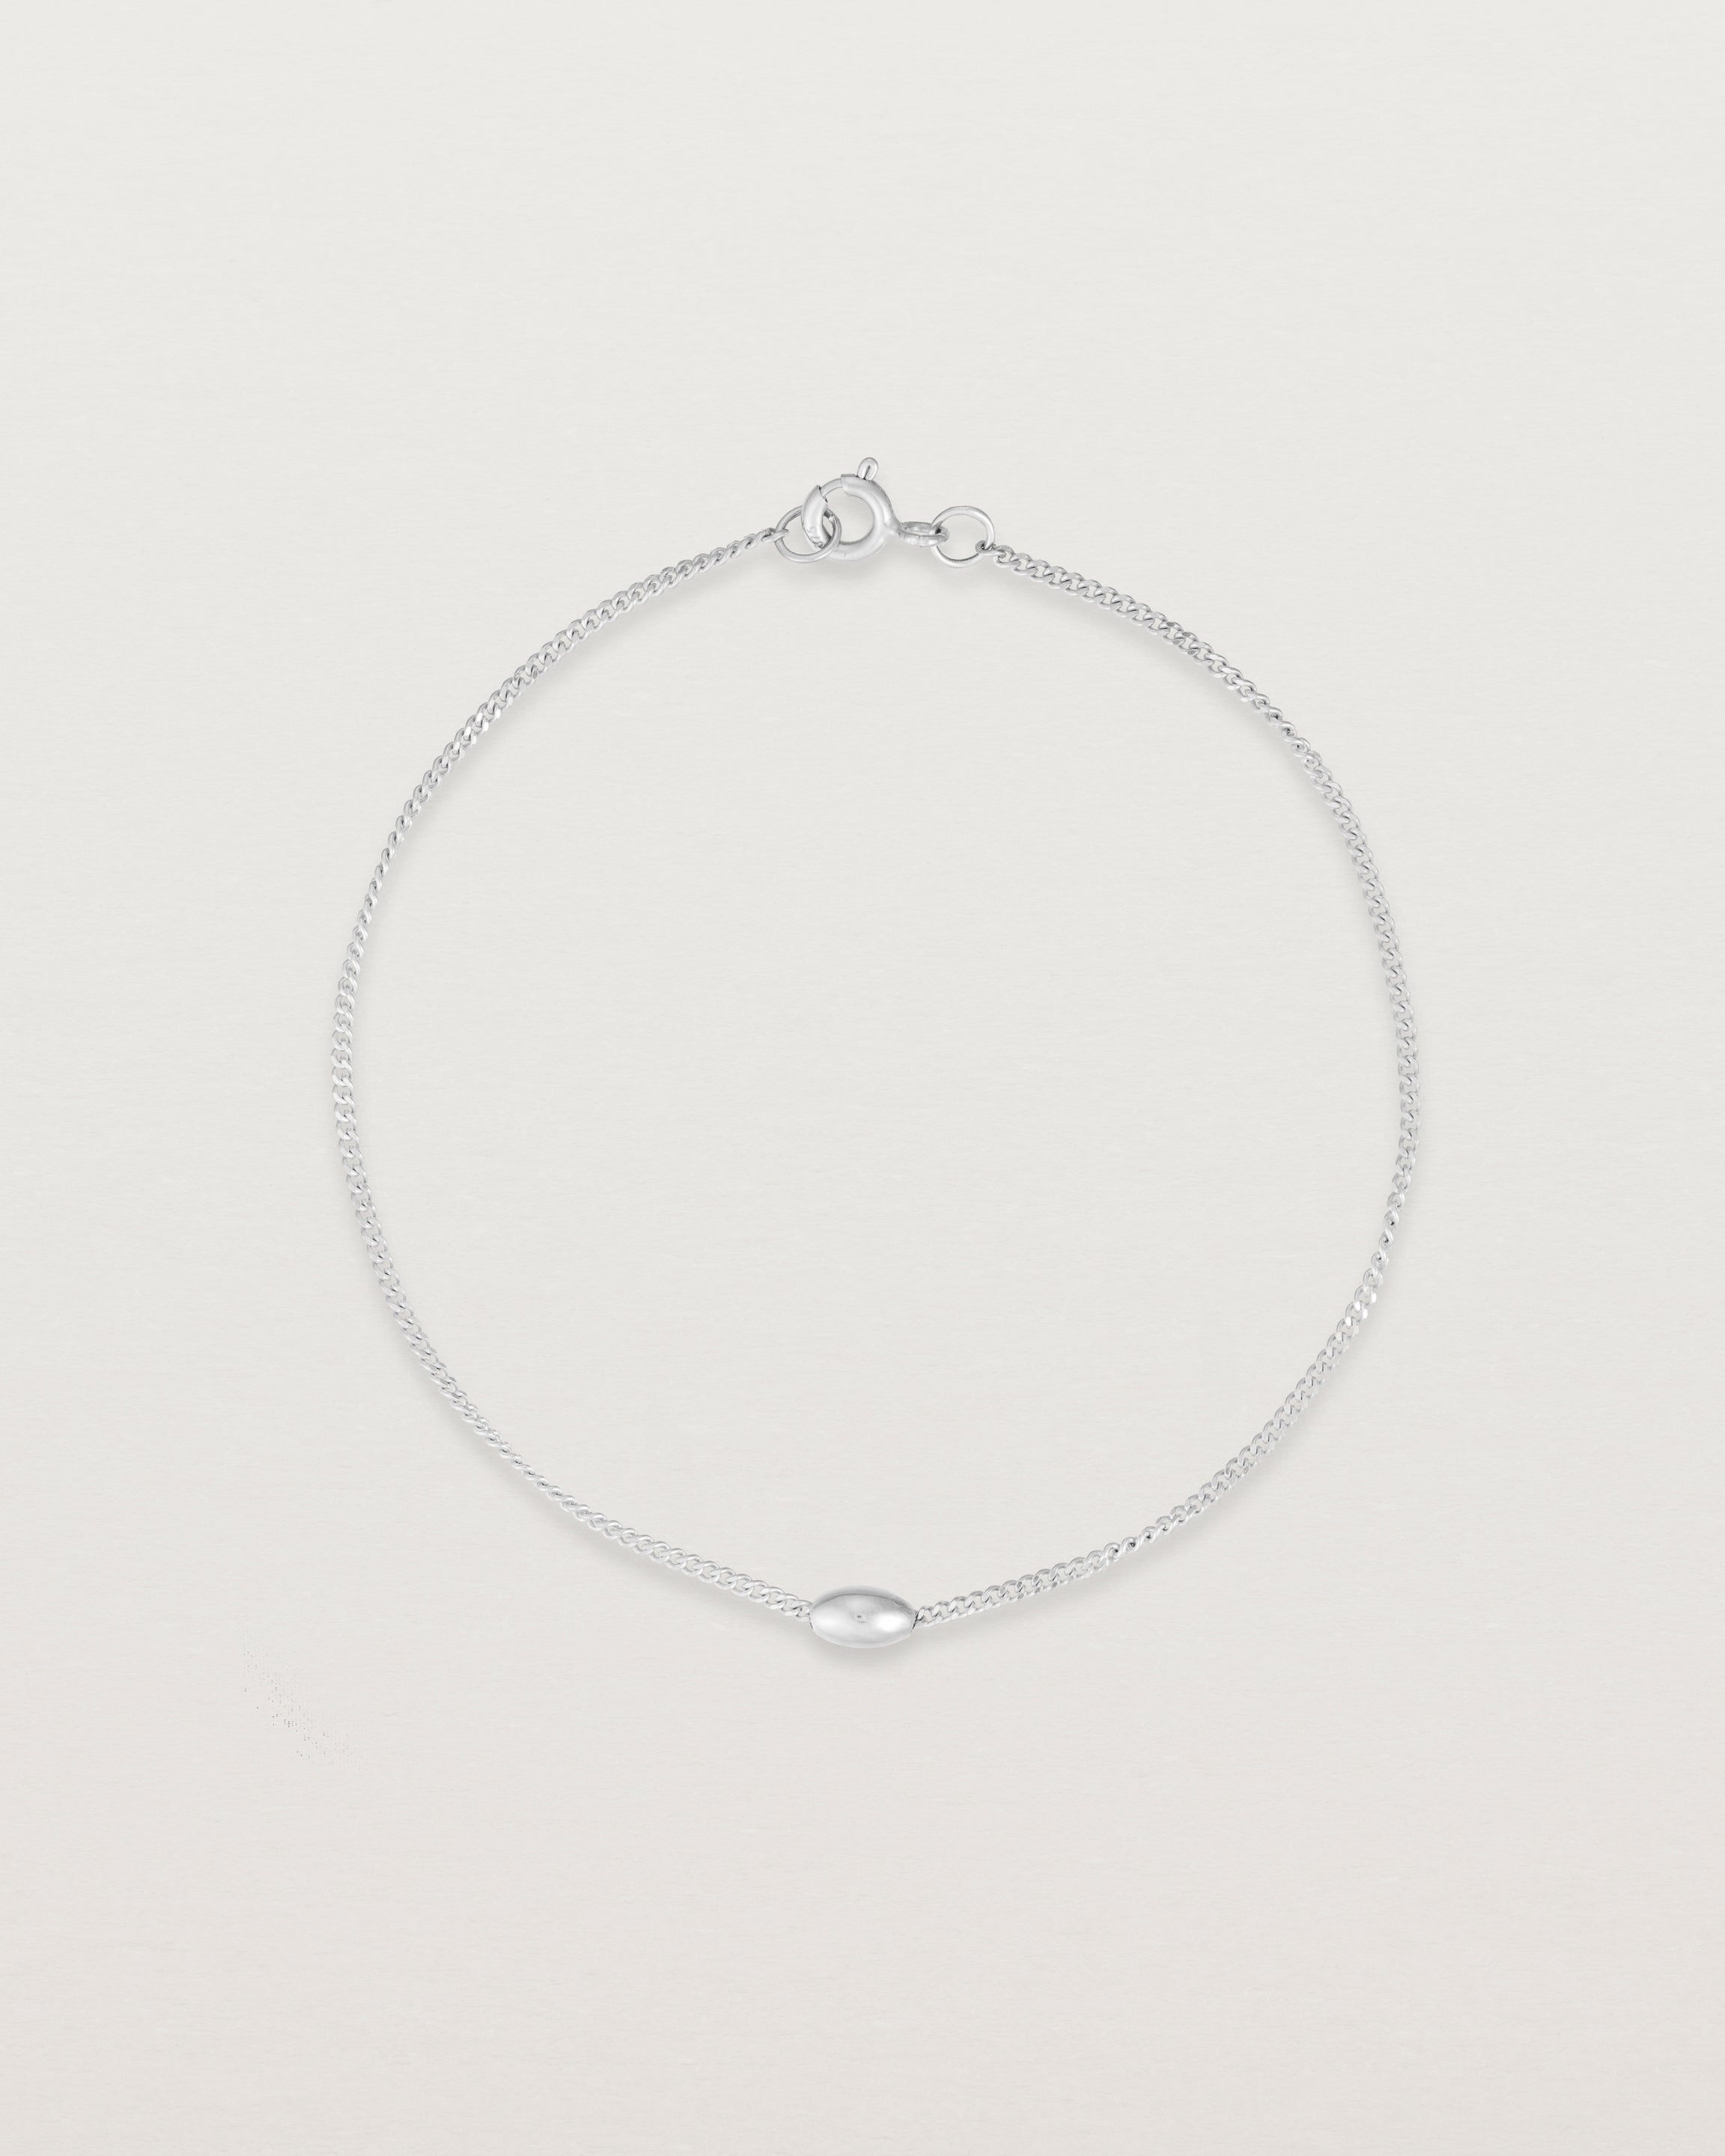 top view of Sonder bracelet in sterling showing one charm